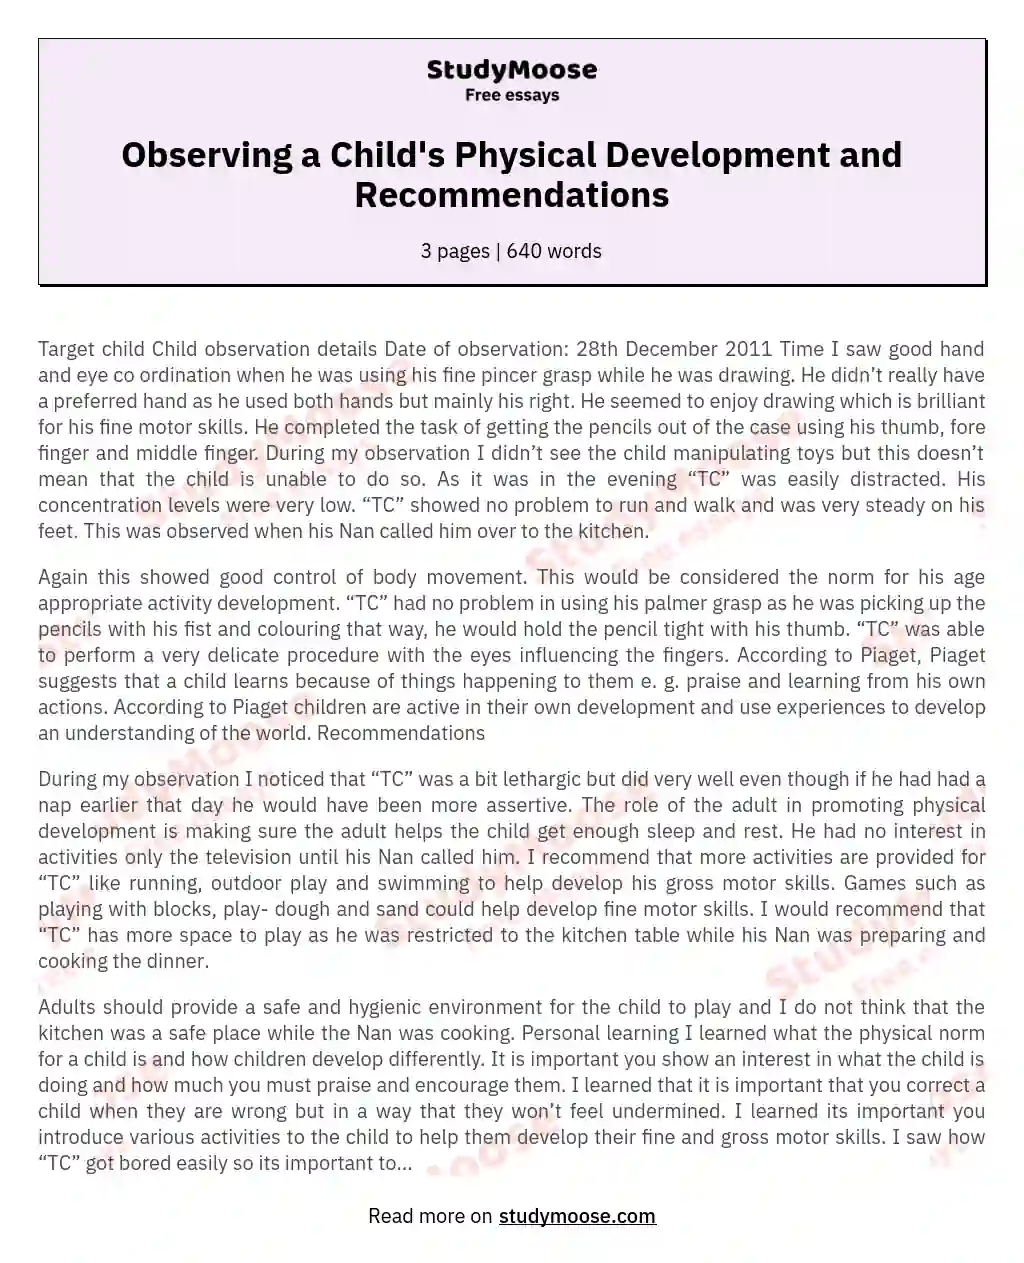 Observing a Child's Physical Development and Recommendations essay